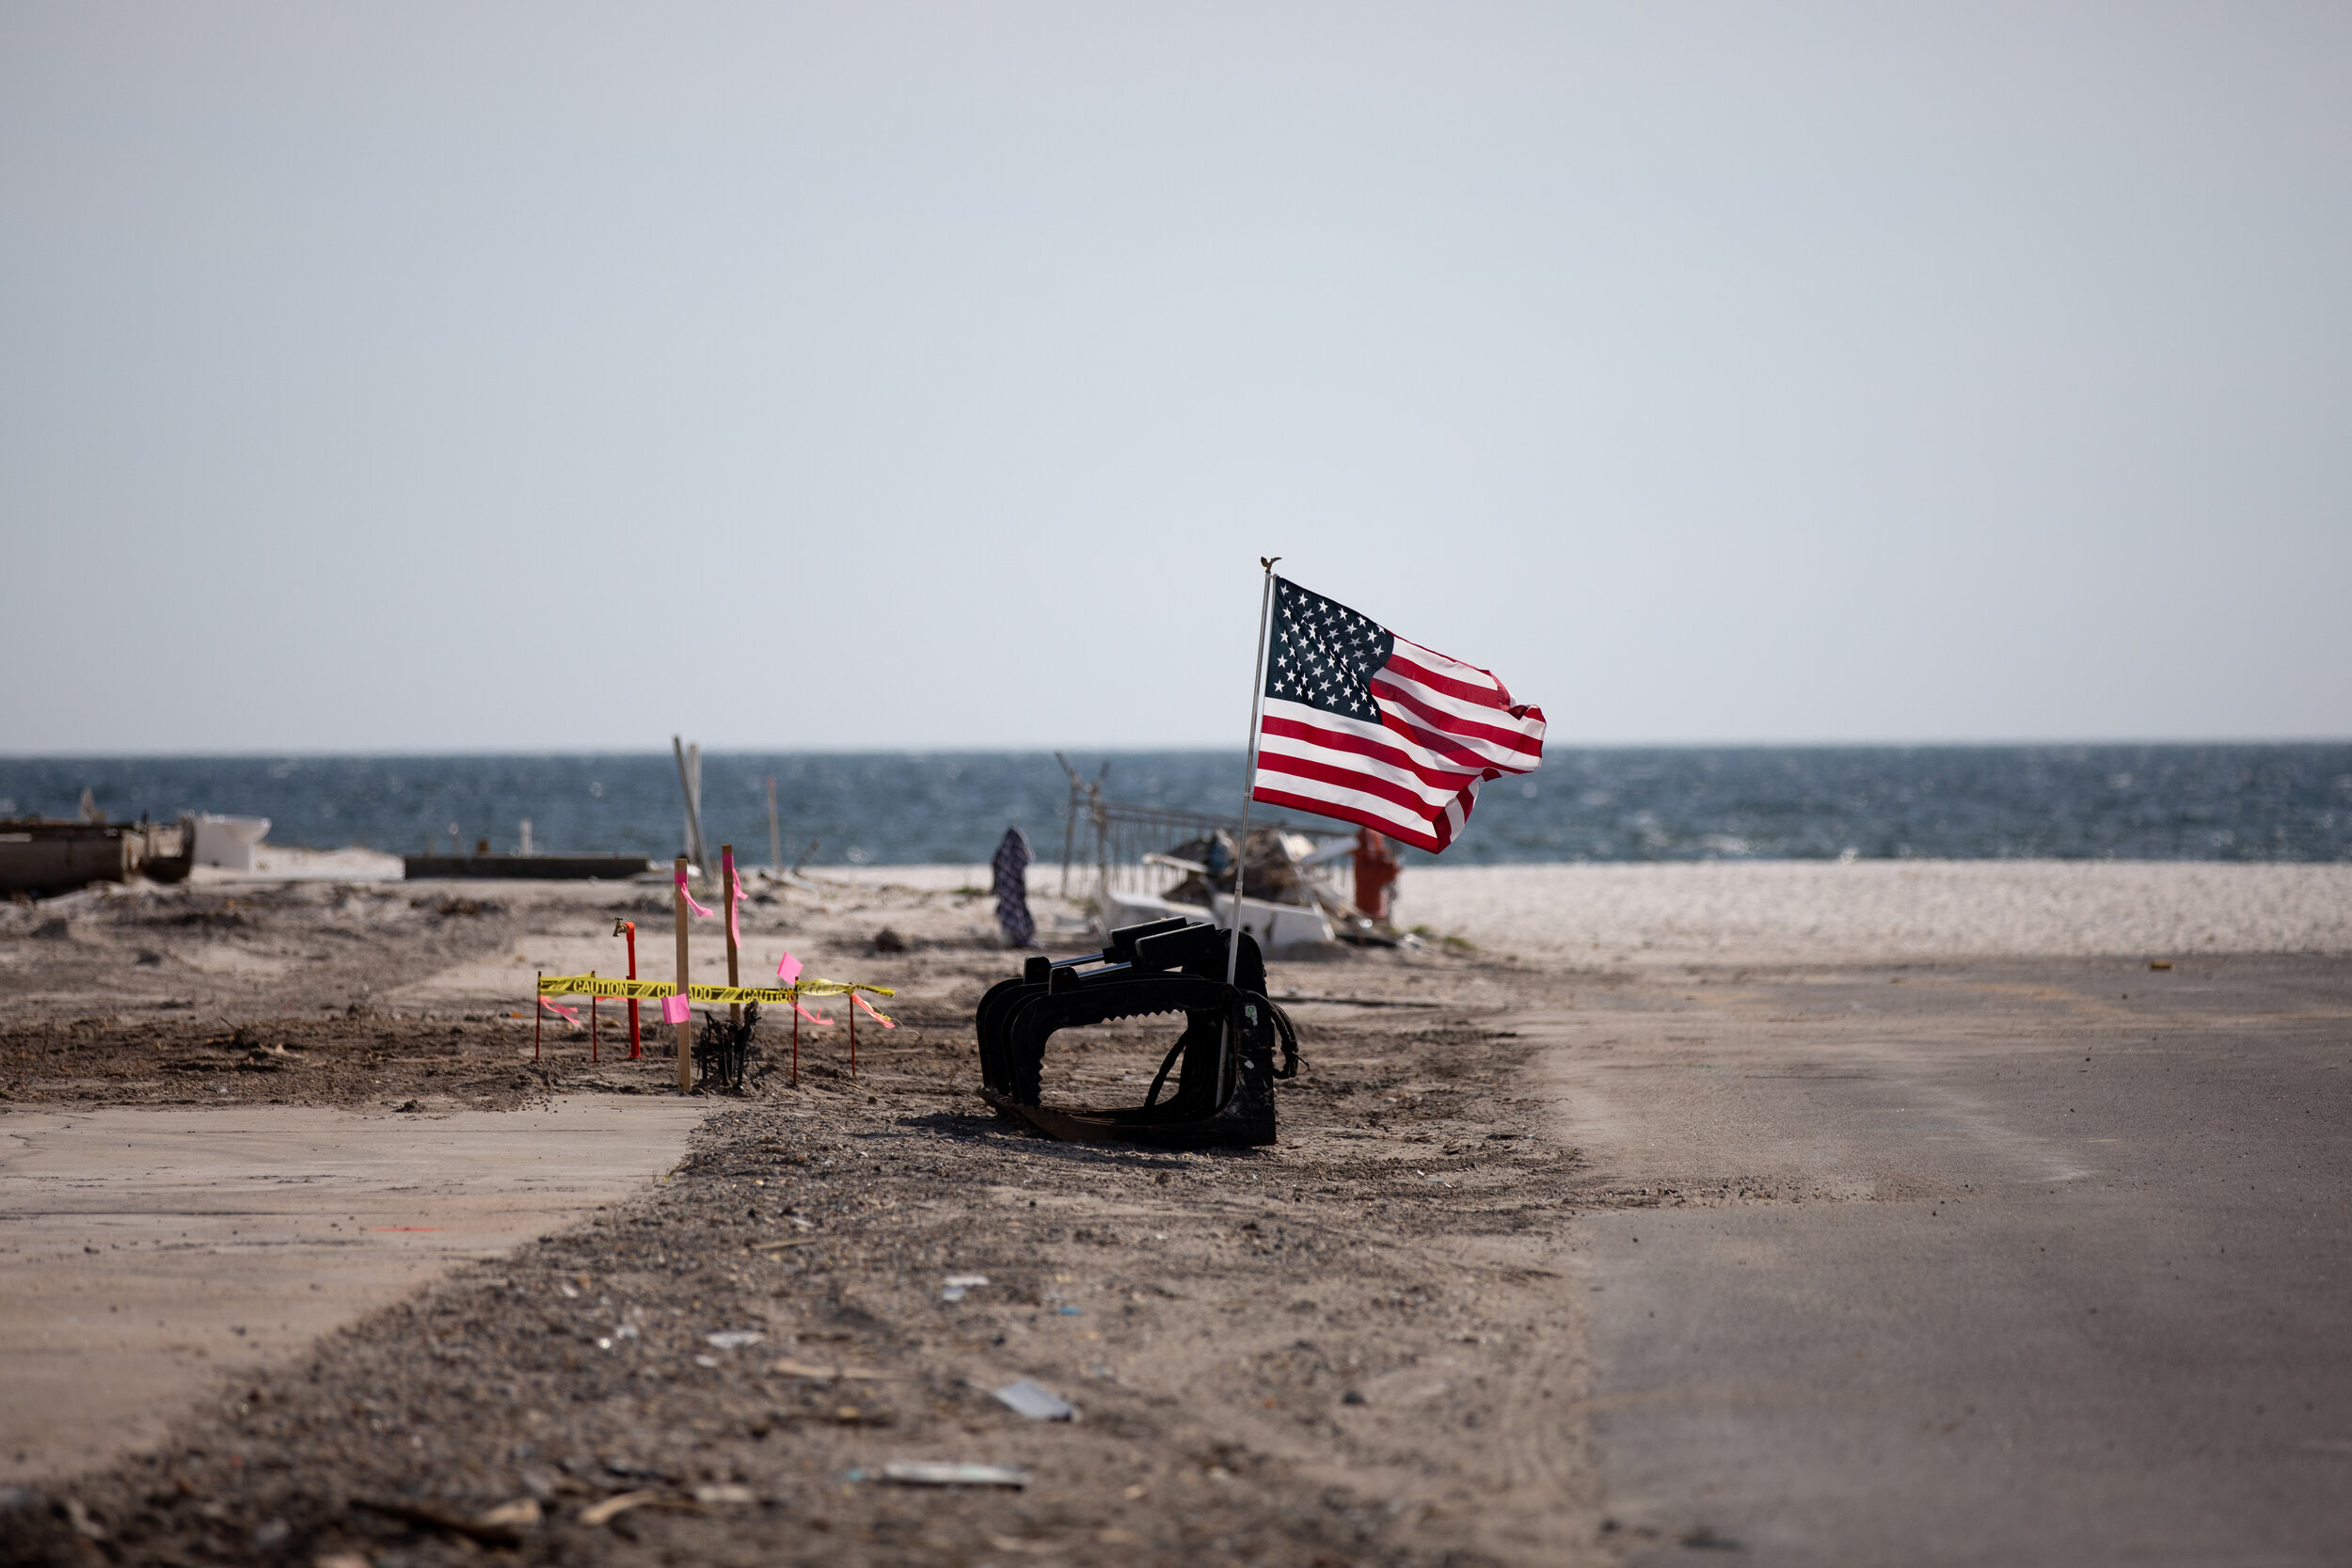  Mexico Beach six months after Hurricane Michael for   The Washington Post   